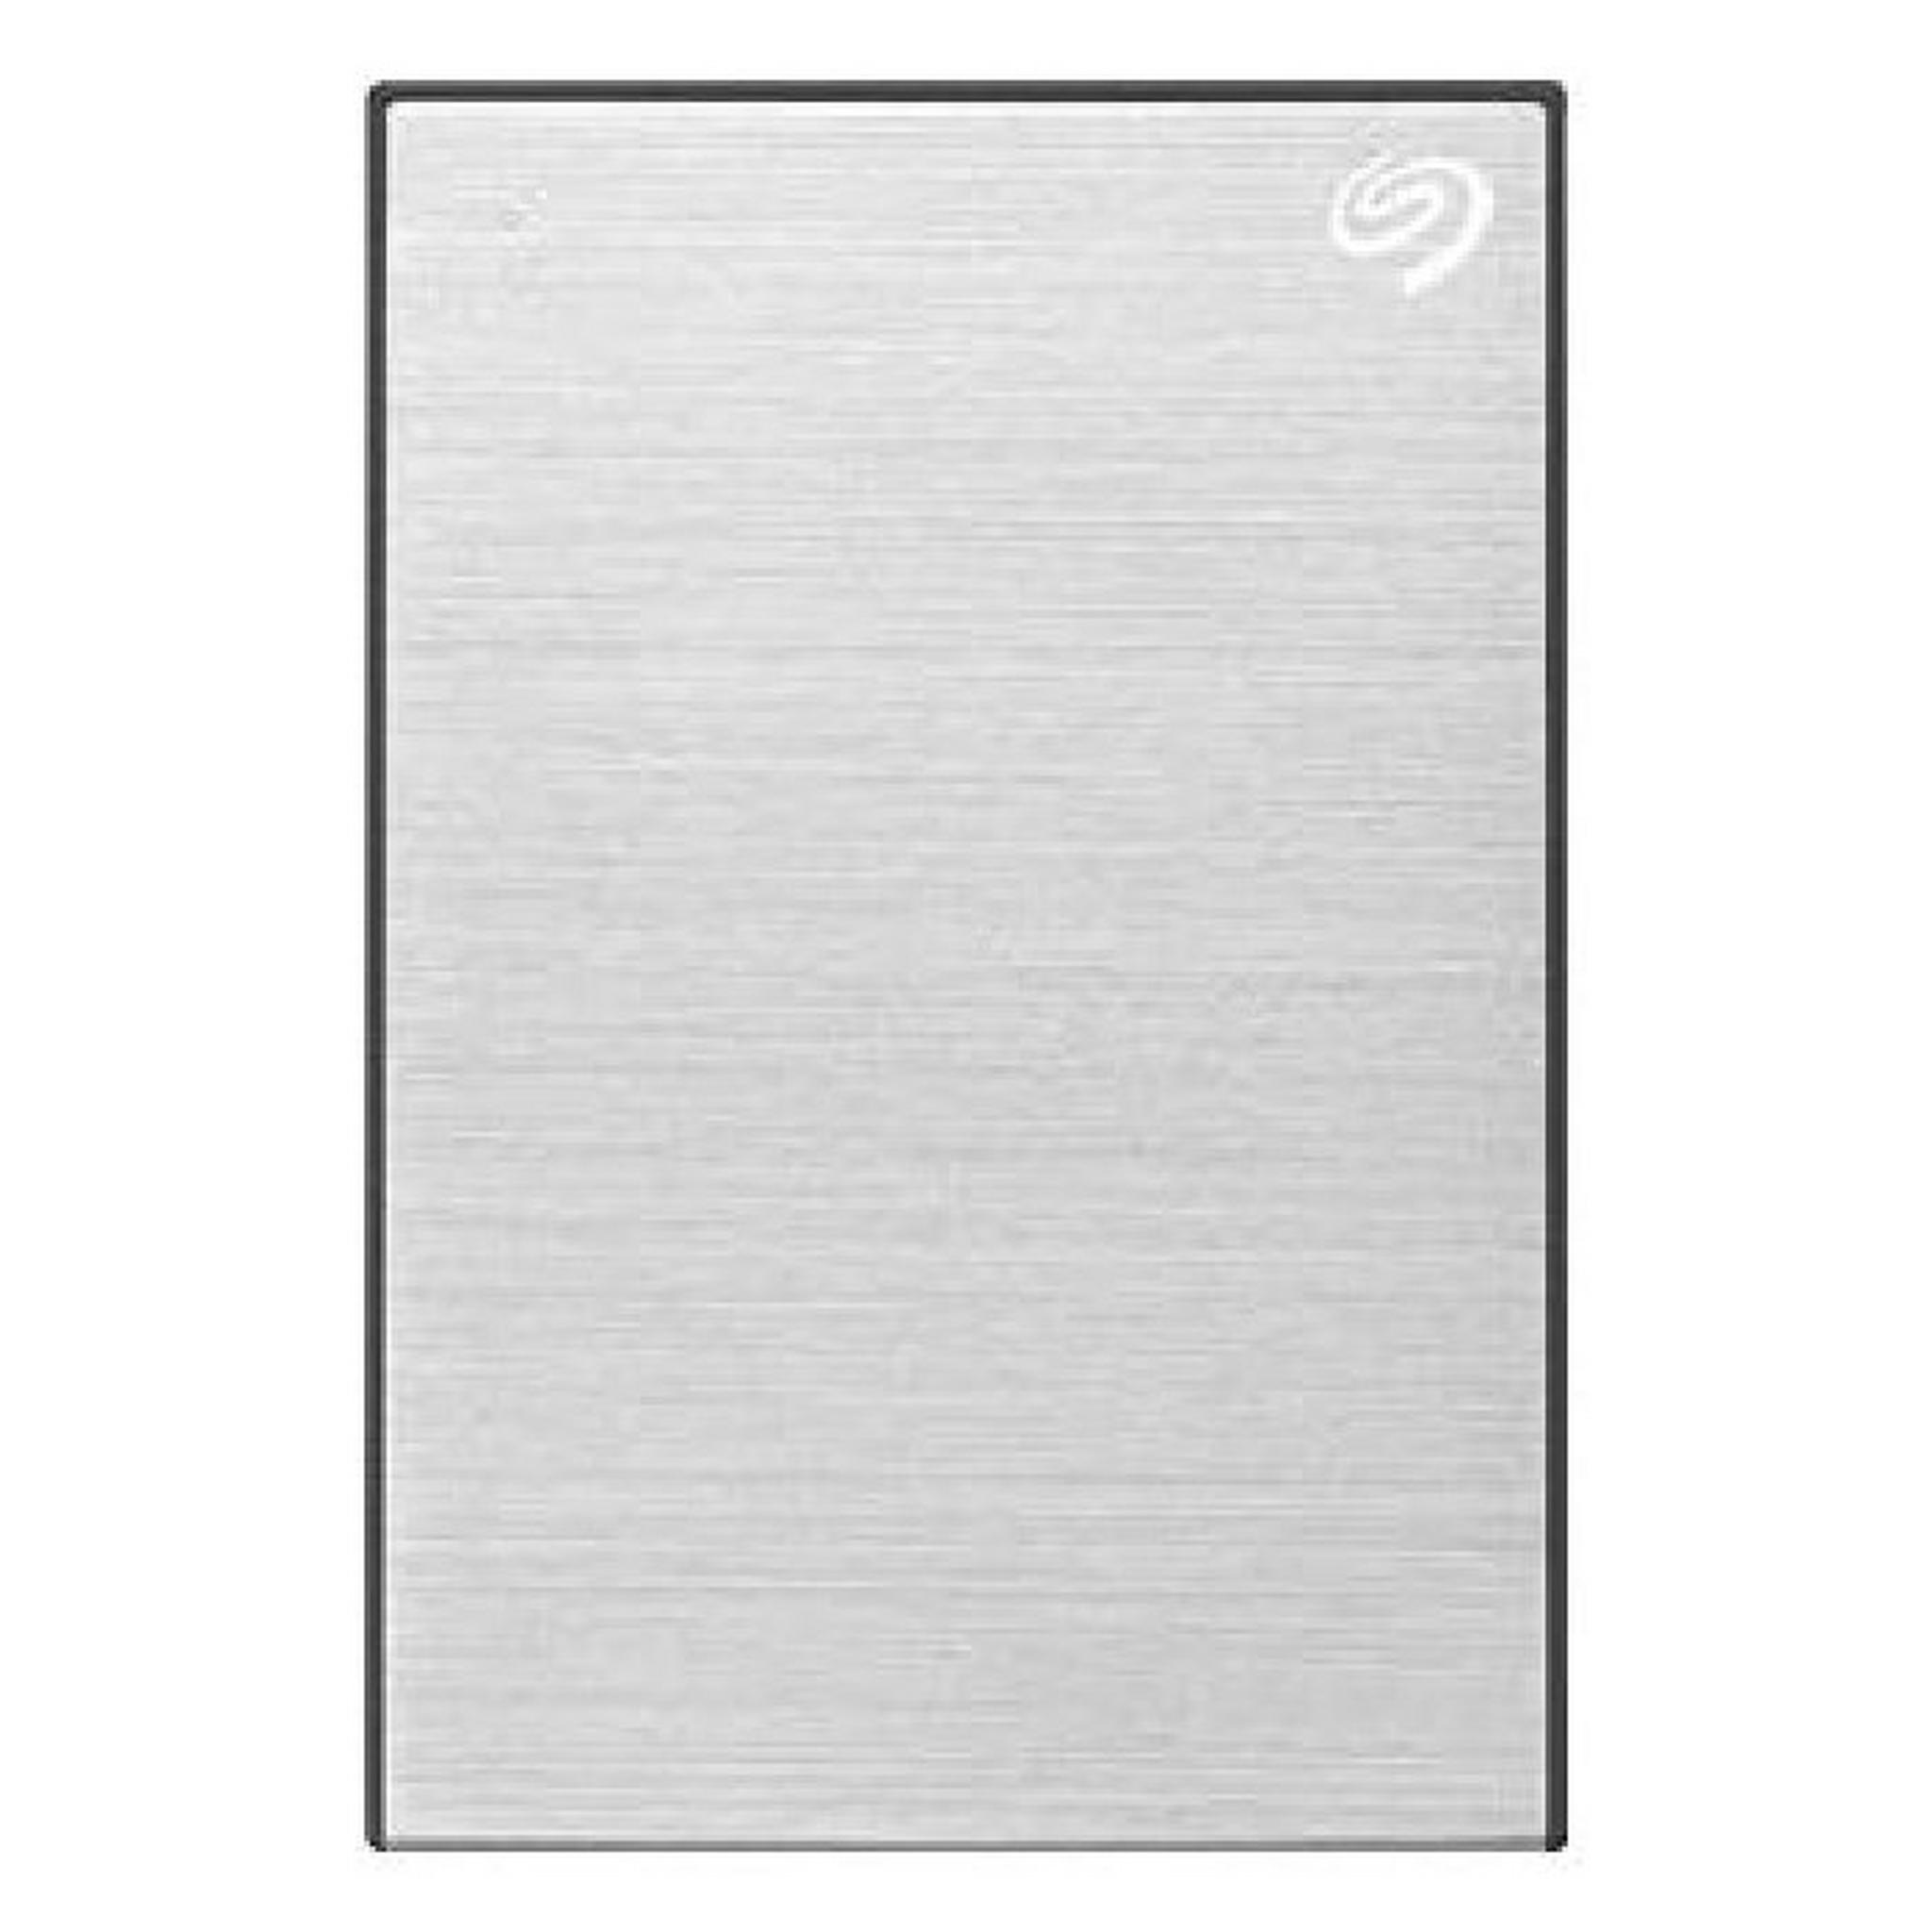 Seagate One Touch 5TB USB 3.2 Gen 1 External Hard Drive - Silver